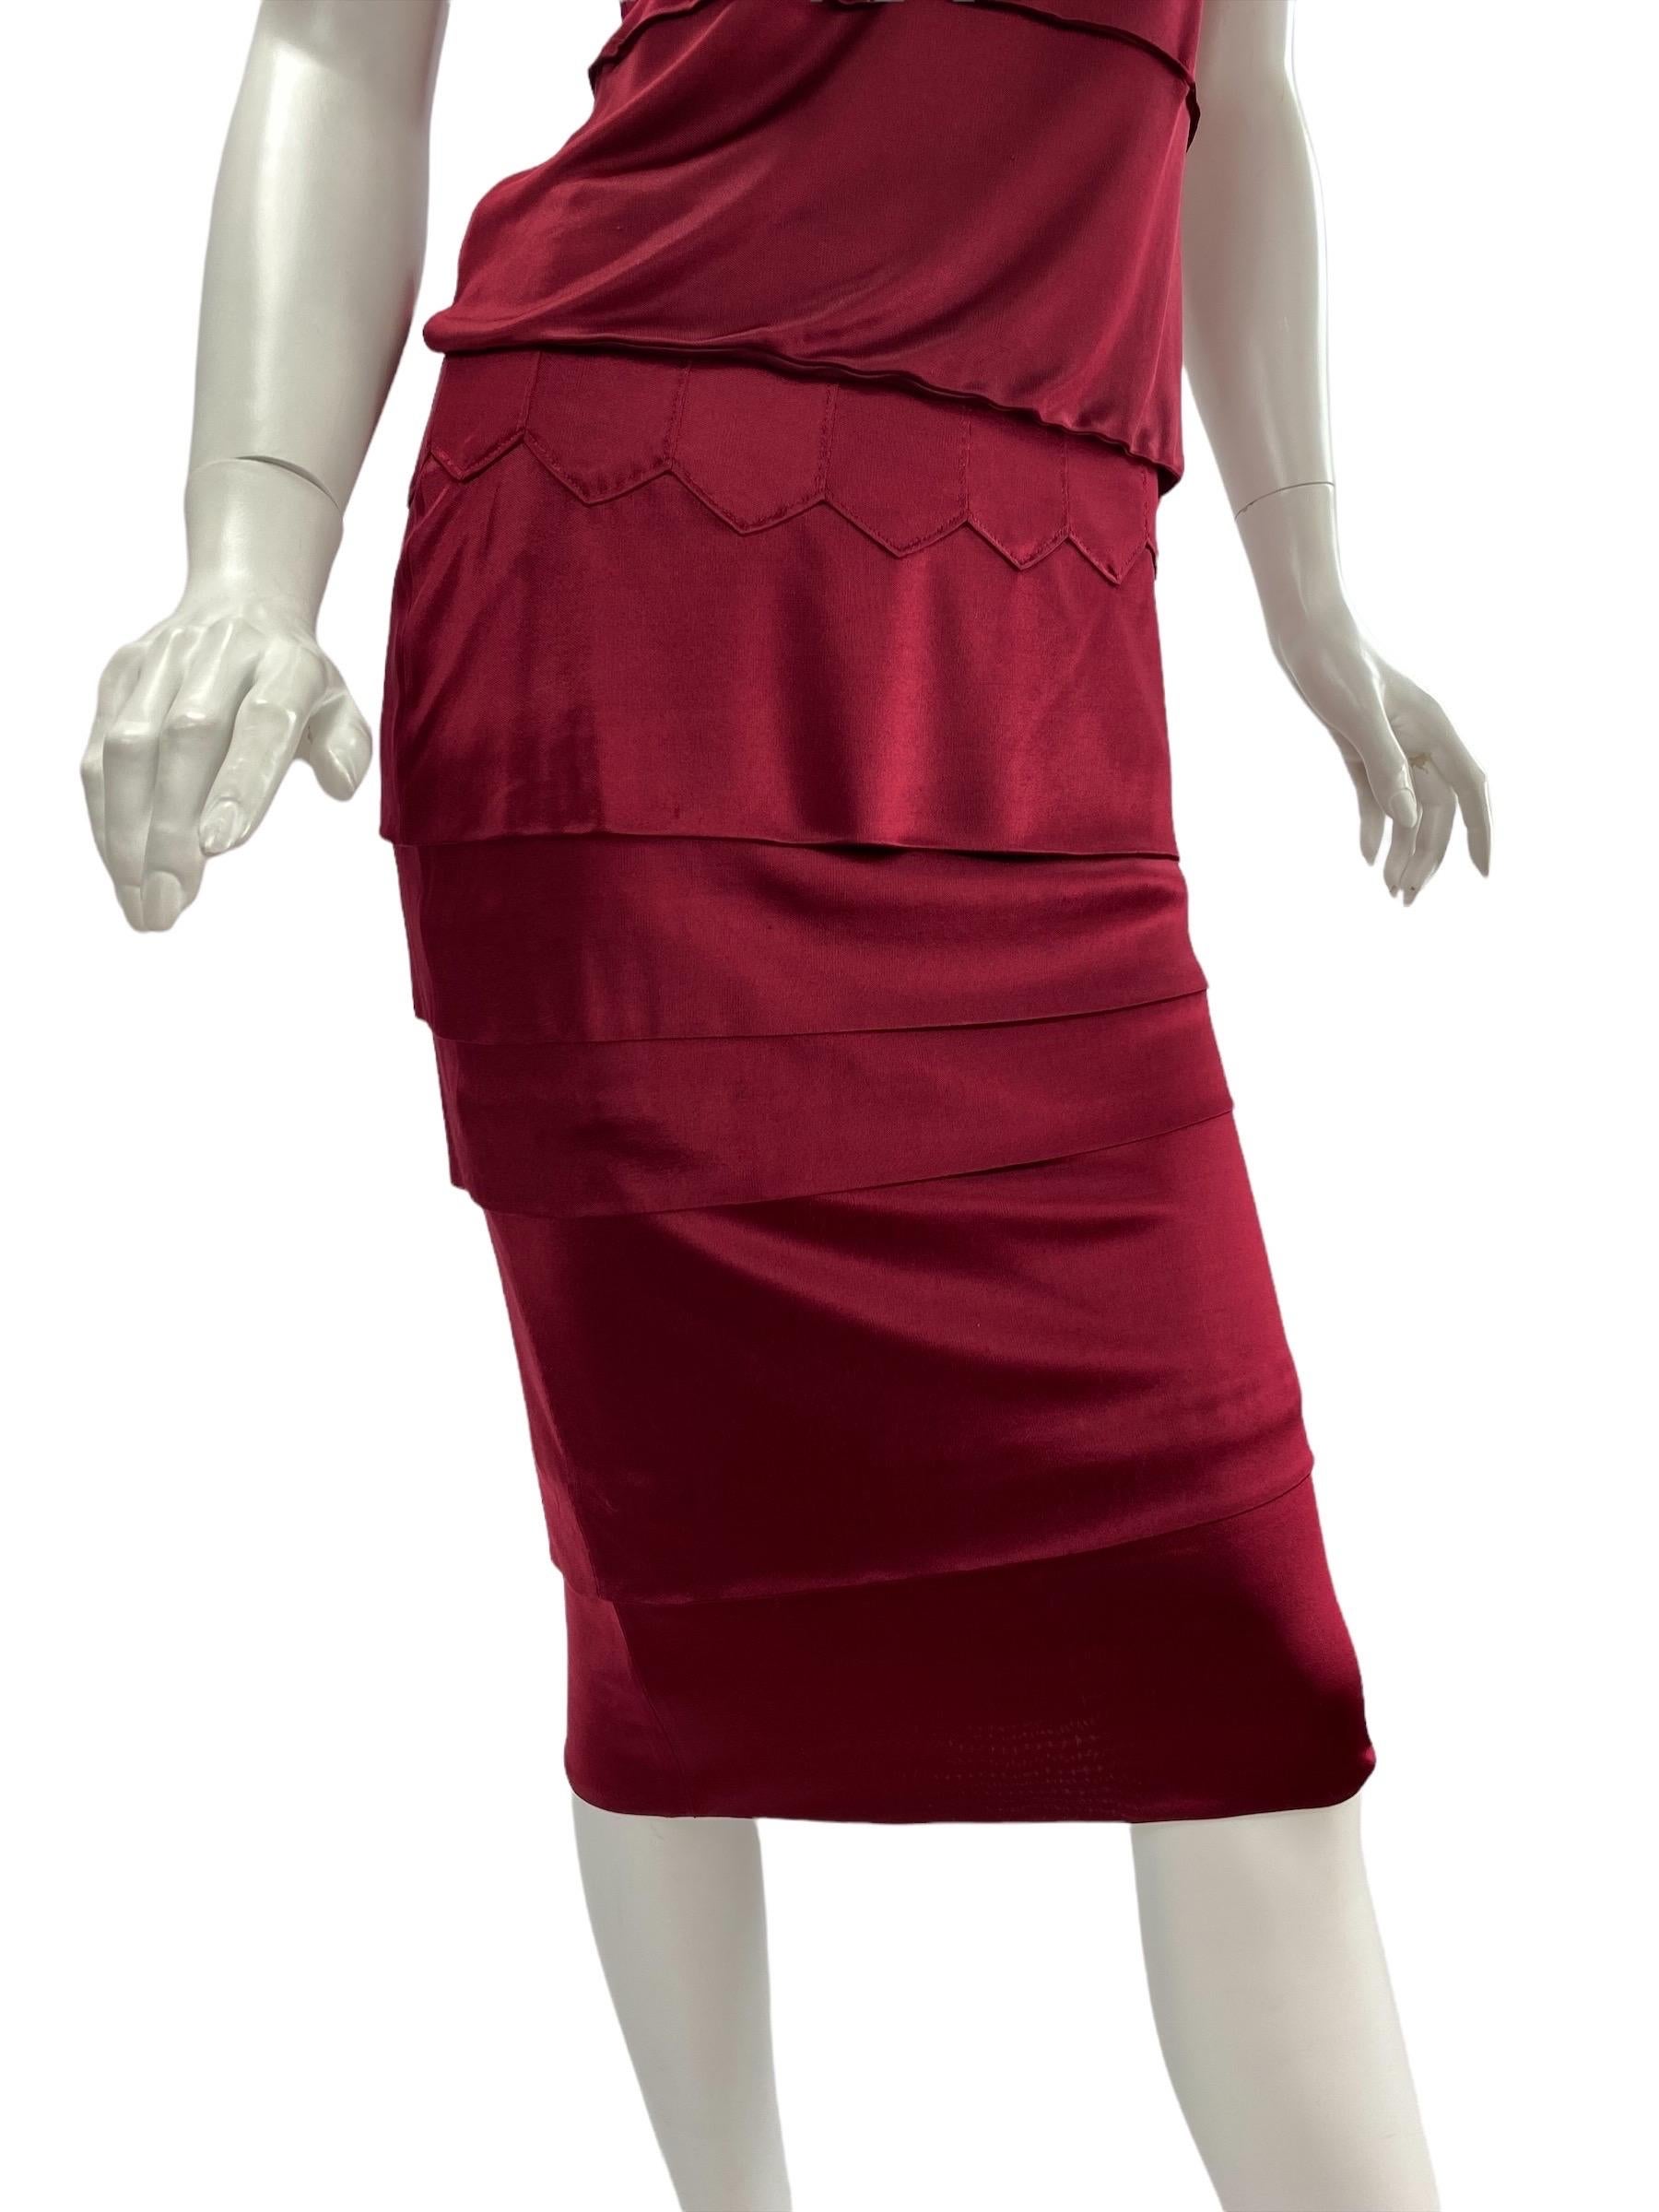 Women's F/W 2004 Vintage Tom Ford for YSL Burgundy Red Jersey Skirt Suit Size S For Sale